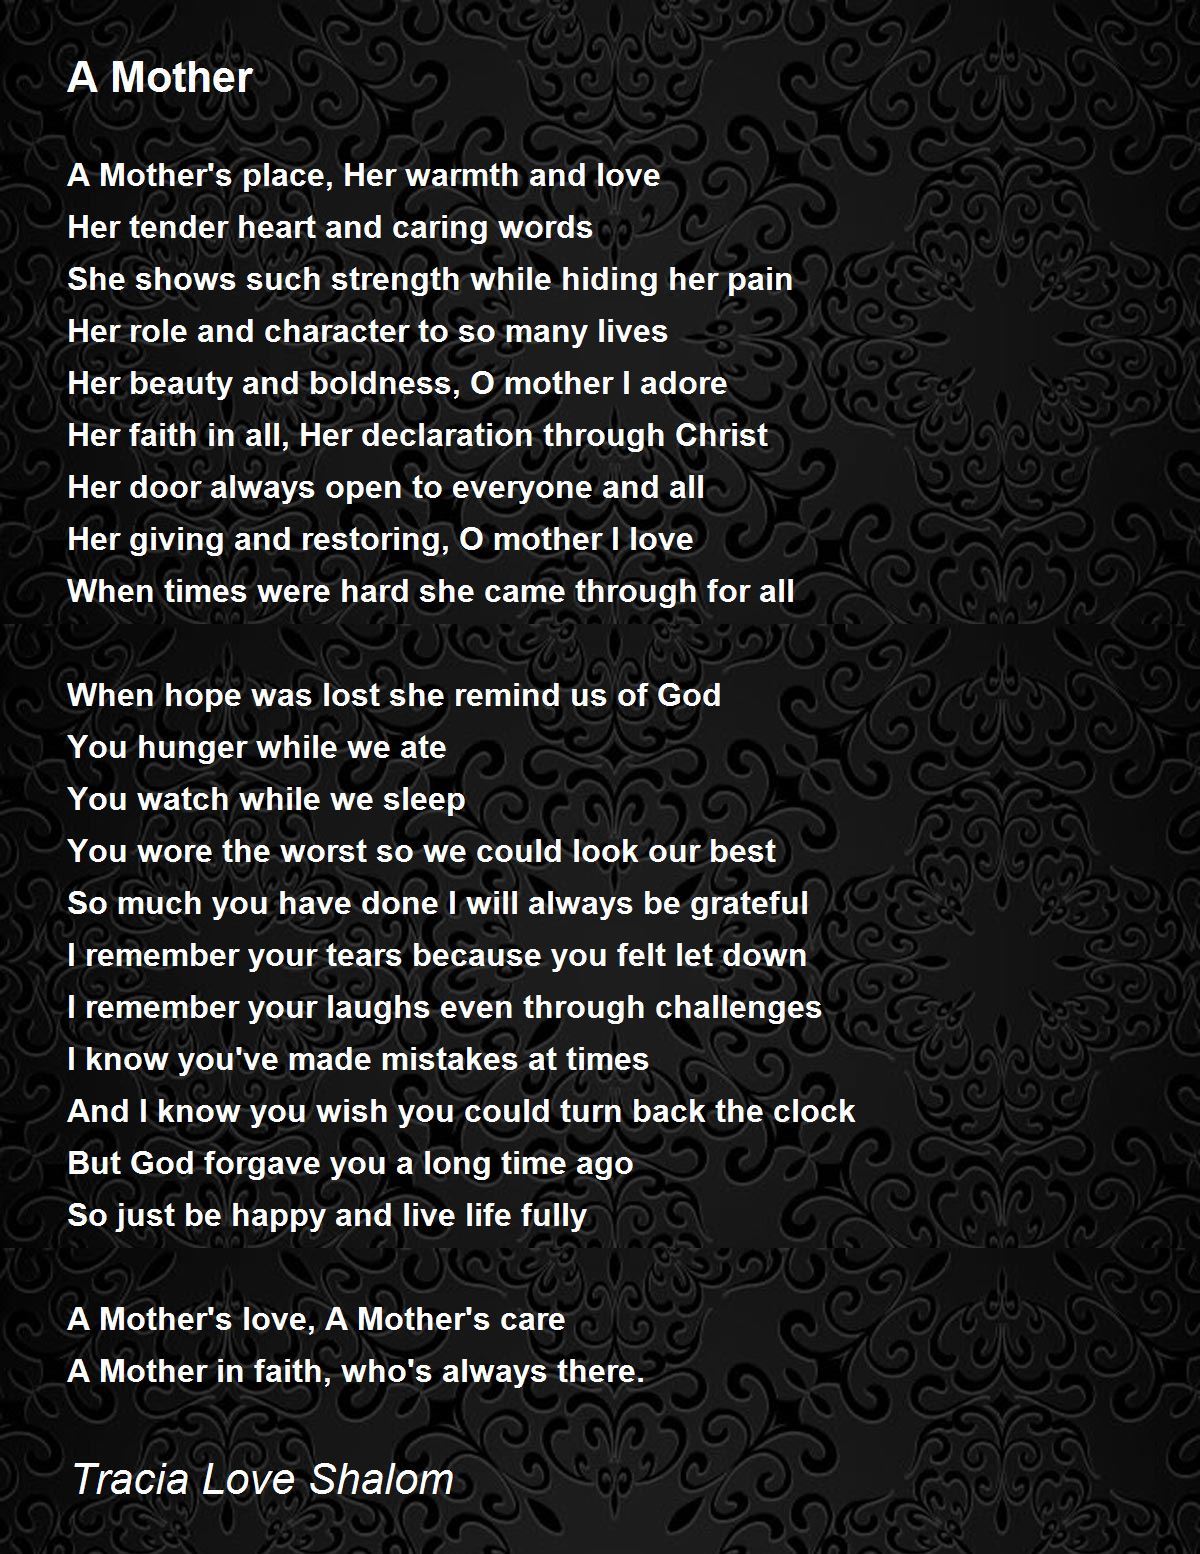 A Mother by Tracia Love Shalom - A Mother Poem